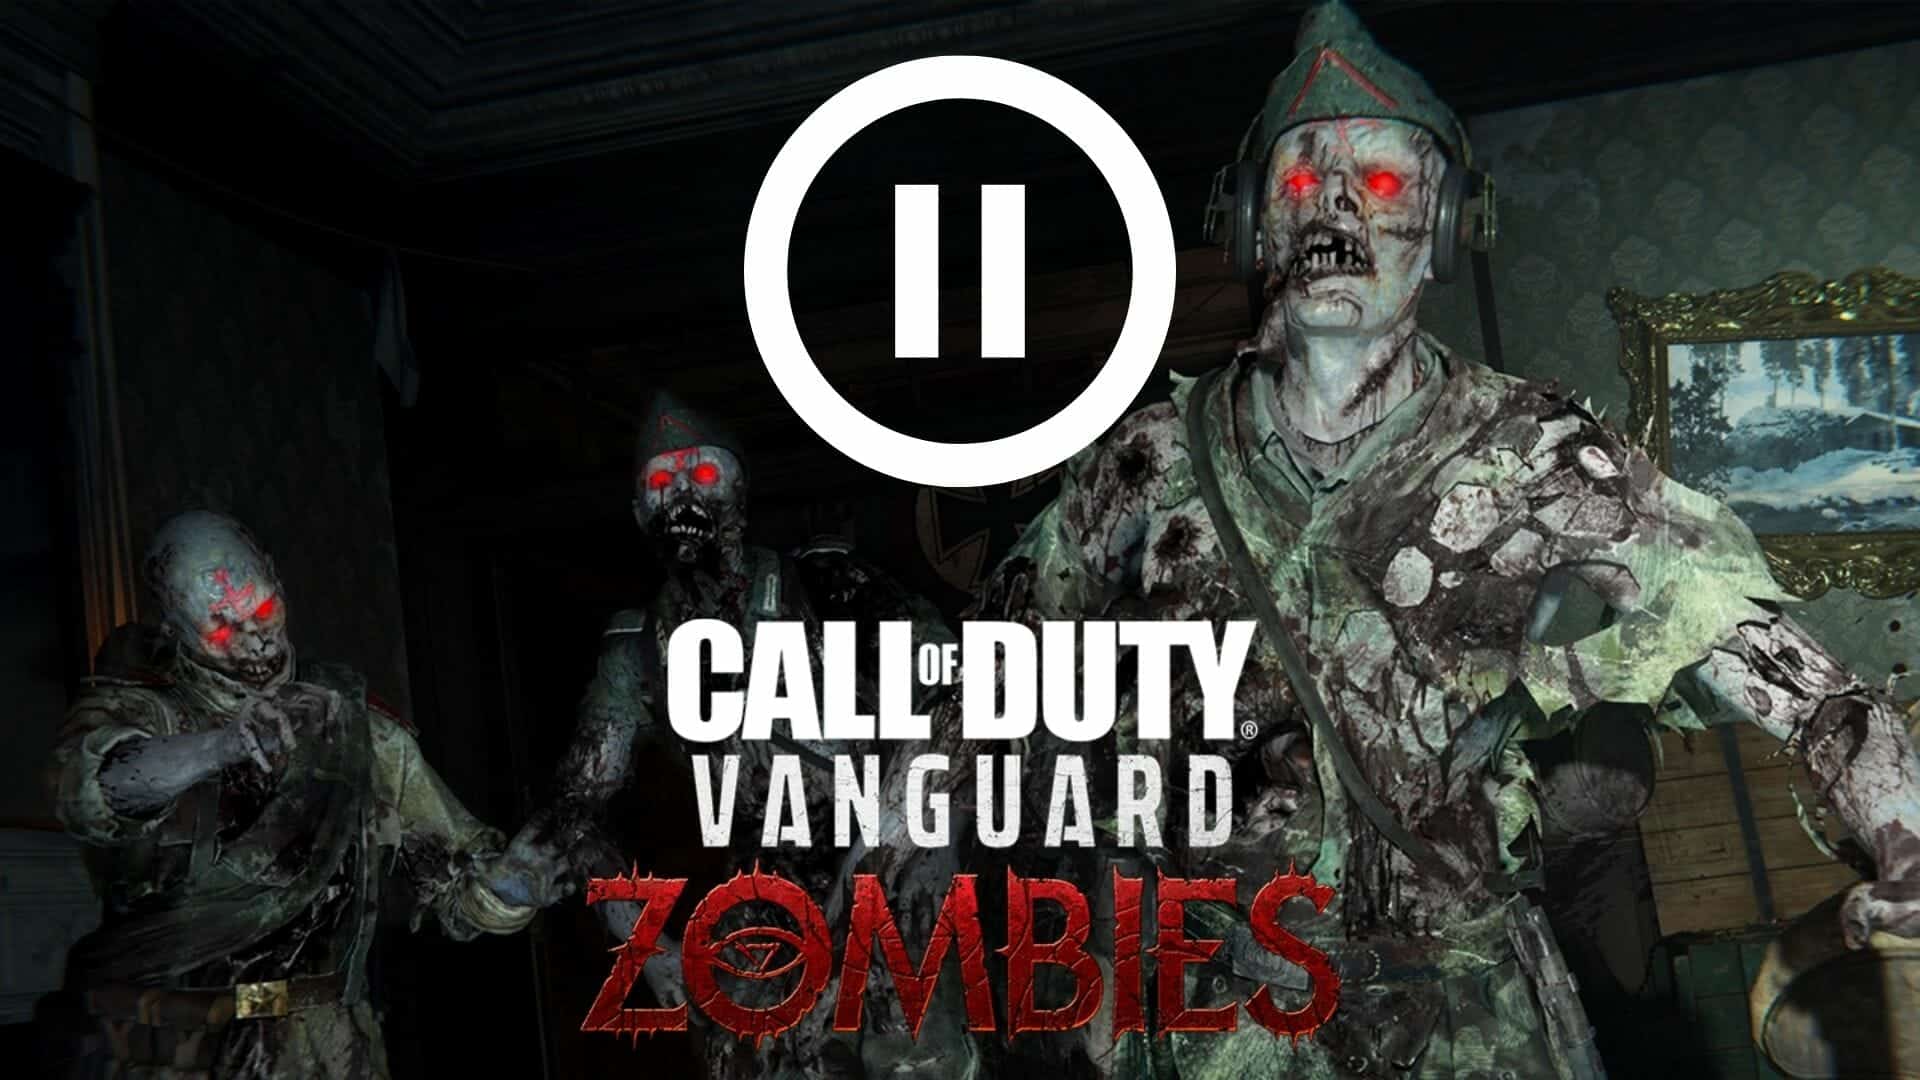 cod zombies logo from vanguard